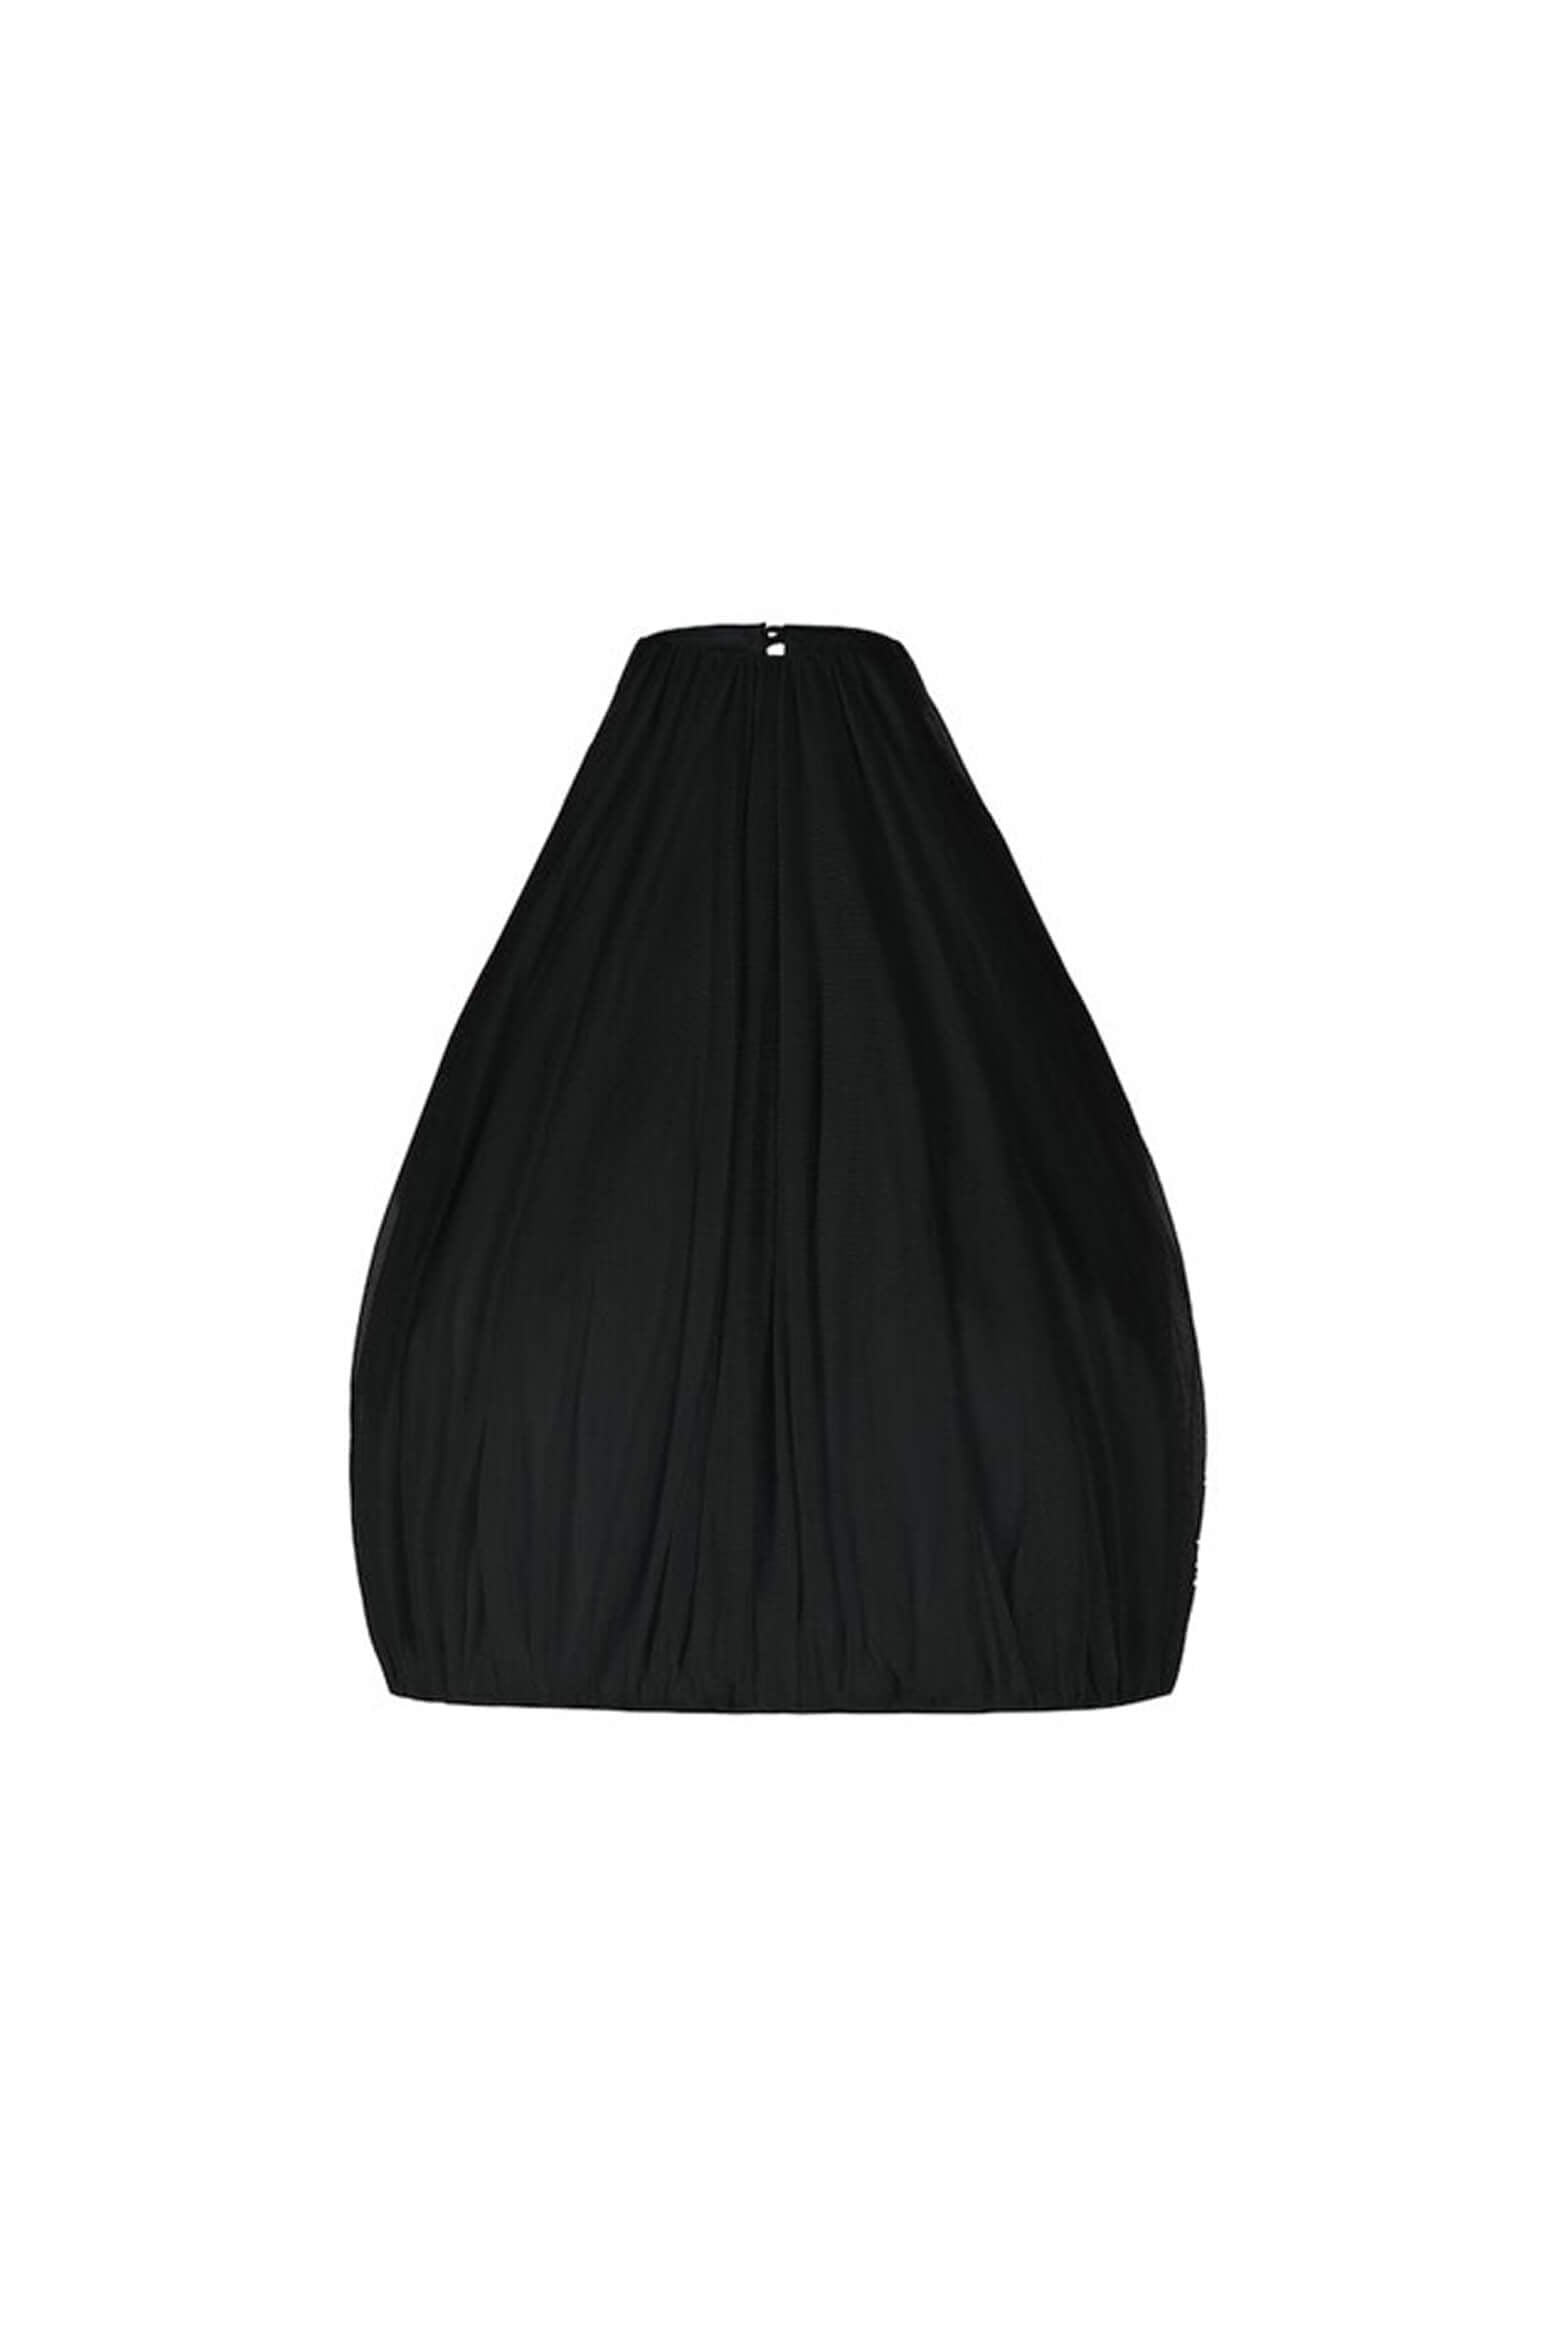 Auteur Studio Stori Silk Tulle Balcony Top in Black from The New Trend